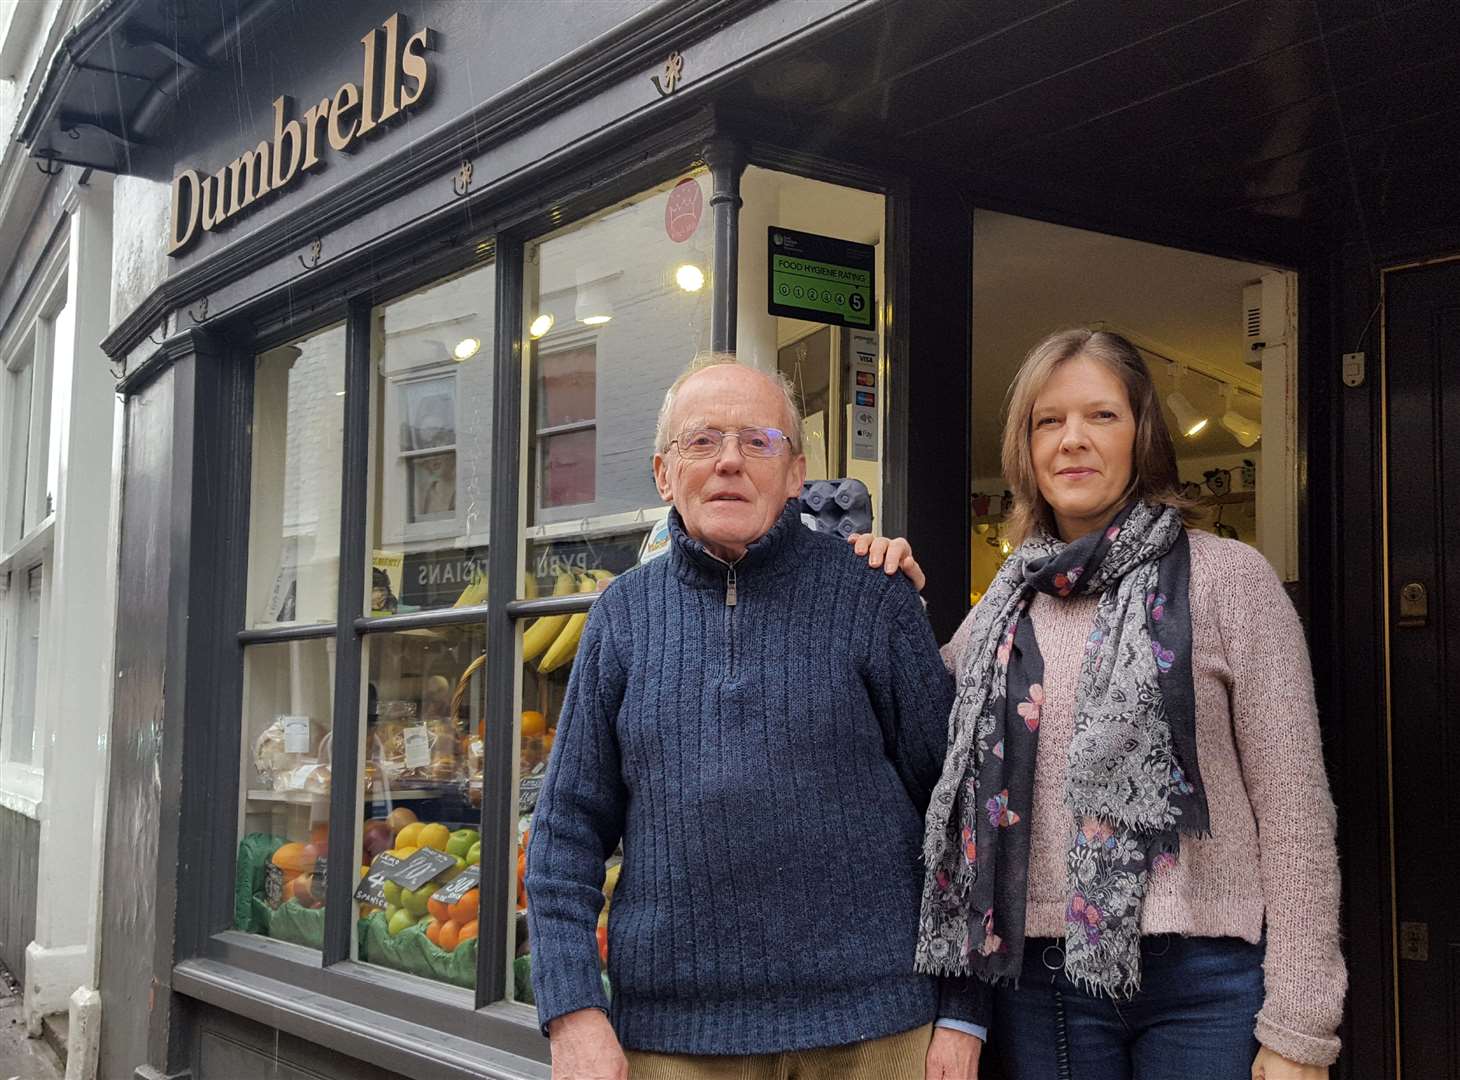 David Dumbrell and neice Anna Thomas outside their shop in Palace Street, Canterbury (1322574)